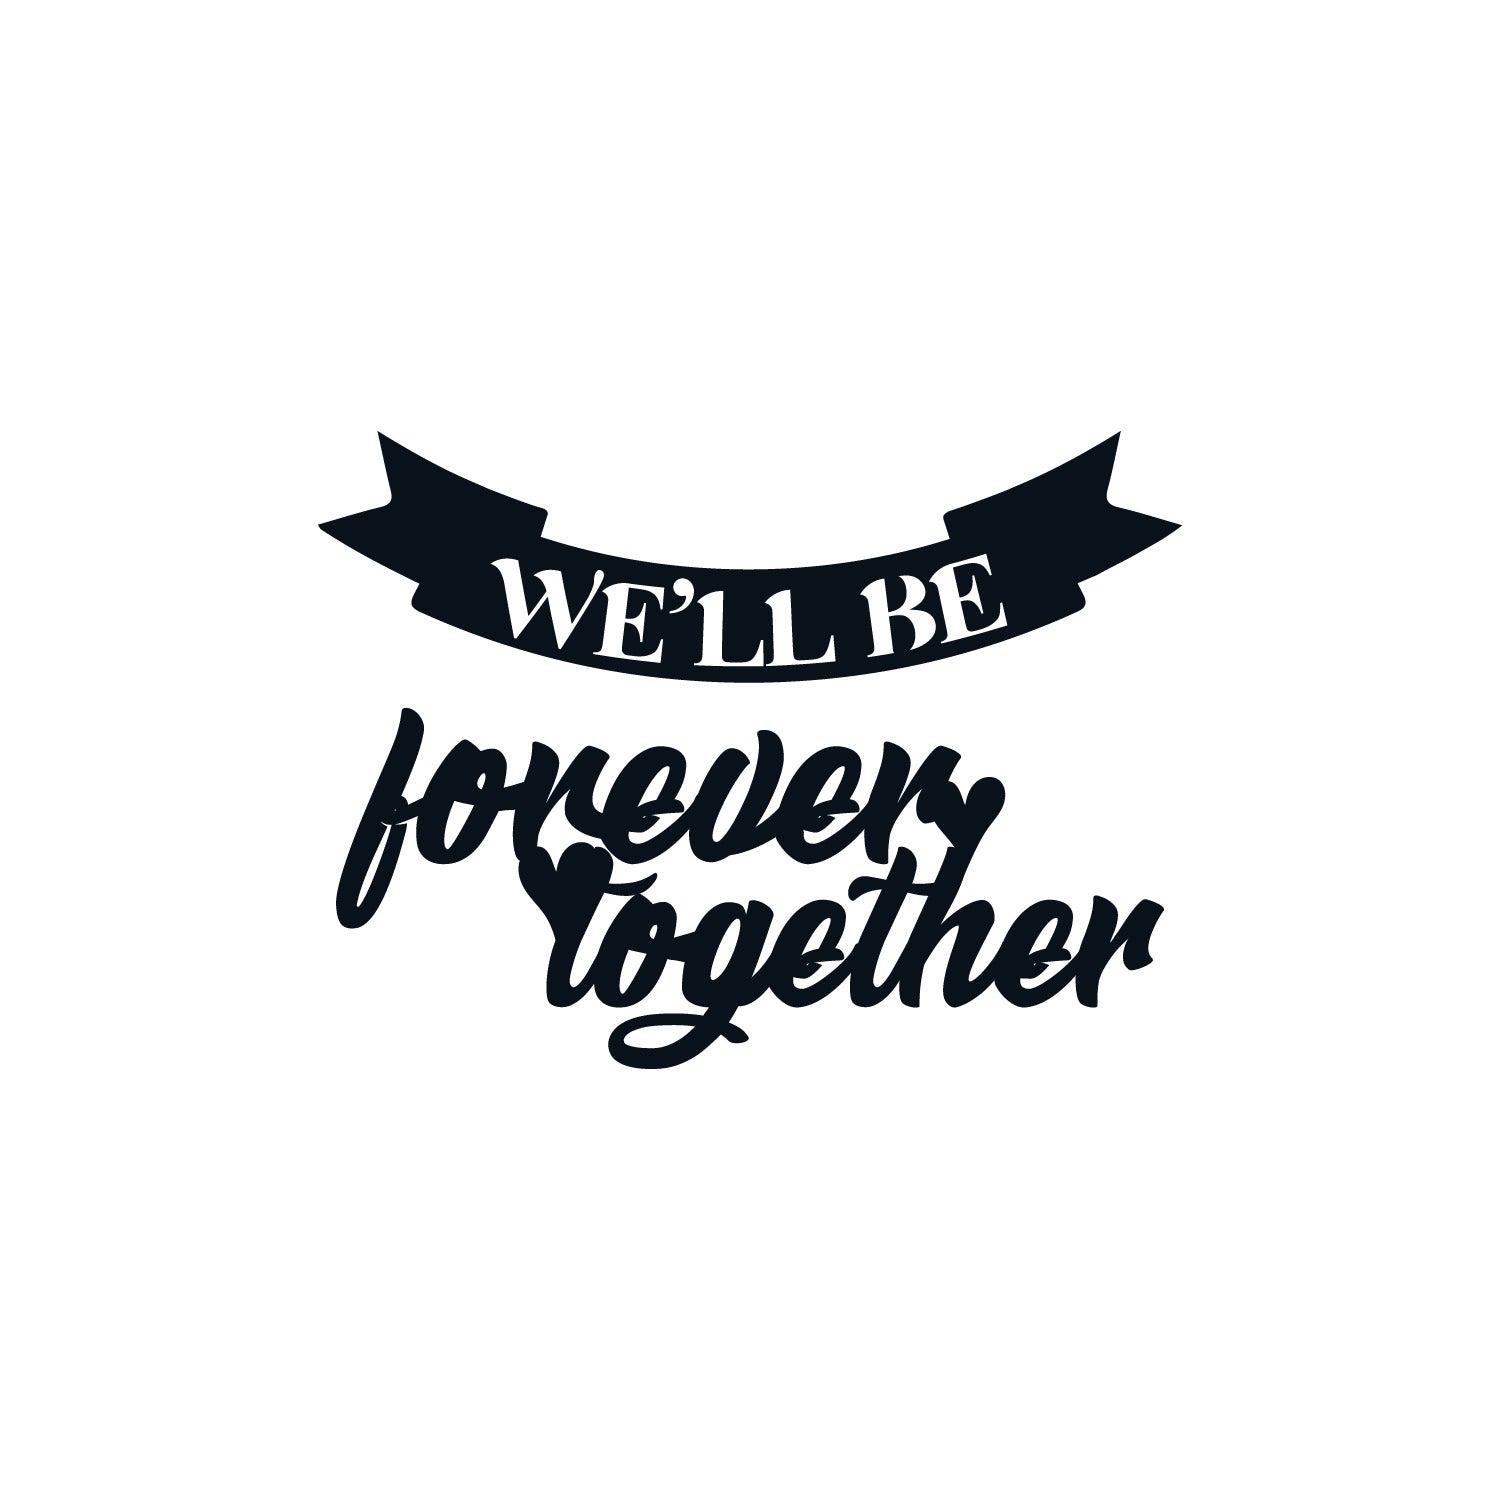 We Will Be Forever Together Love Theme Black Engineered Wood Wall Art Cutout, Ready To Hang Home Decor 2